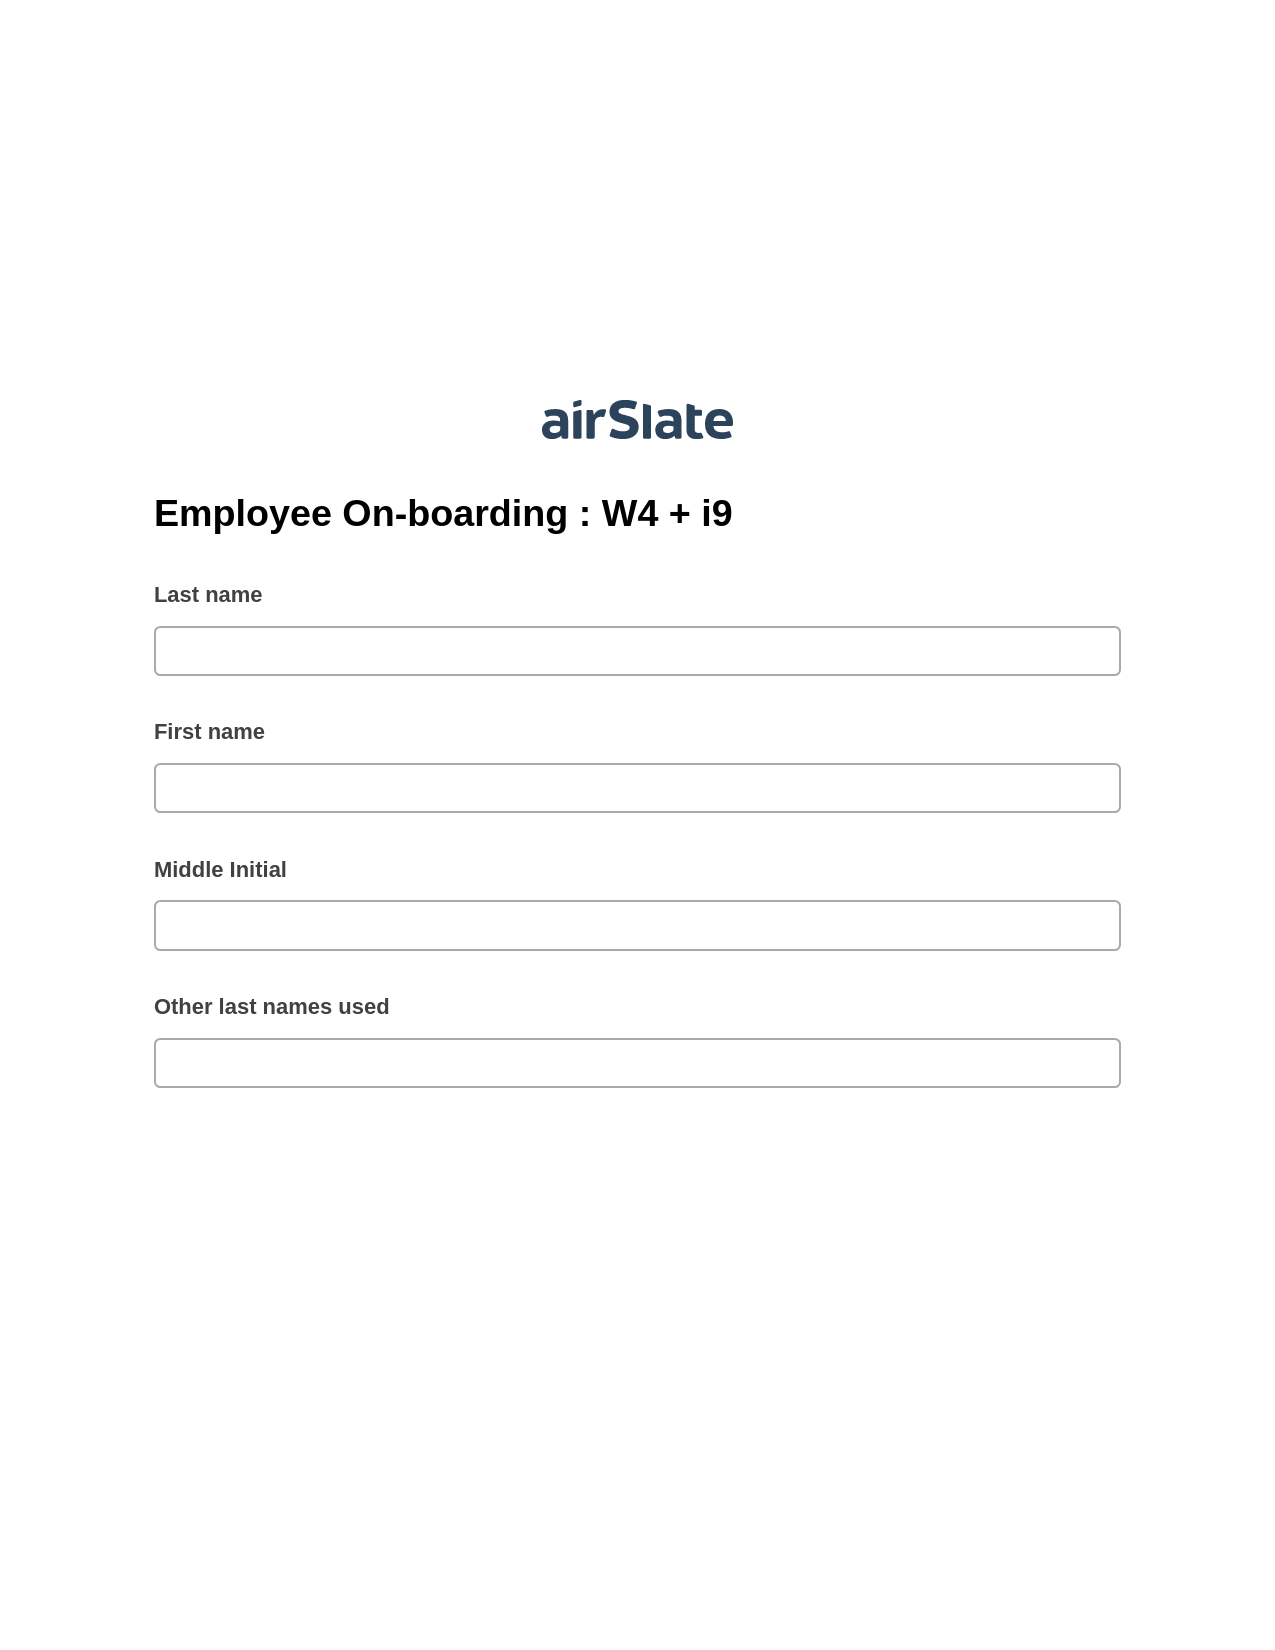 Multirole Employee On-boarding : W4 + i9 Pre-fill Slate from MS Dynamics 365 Records Bot, Pre-fill with Custom Data Bot, Export to Formstack Documents Bot